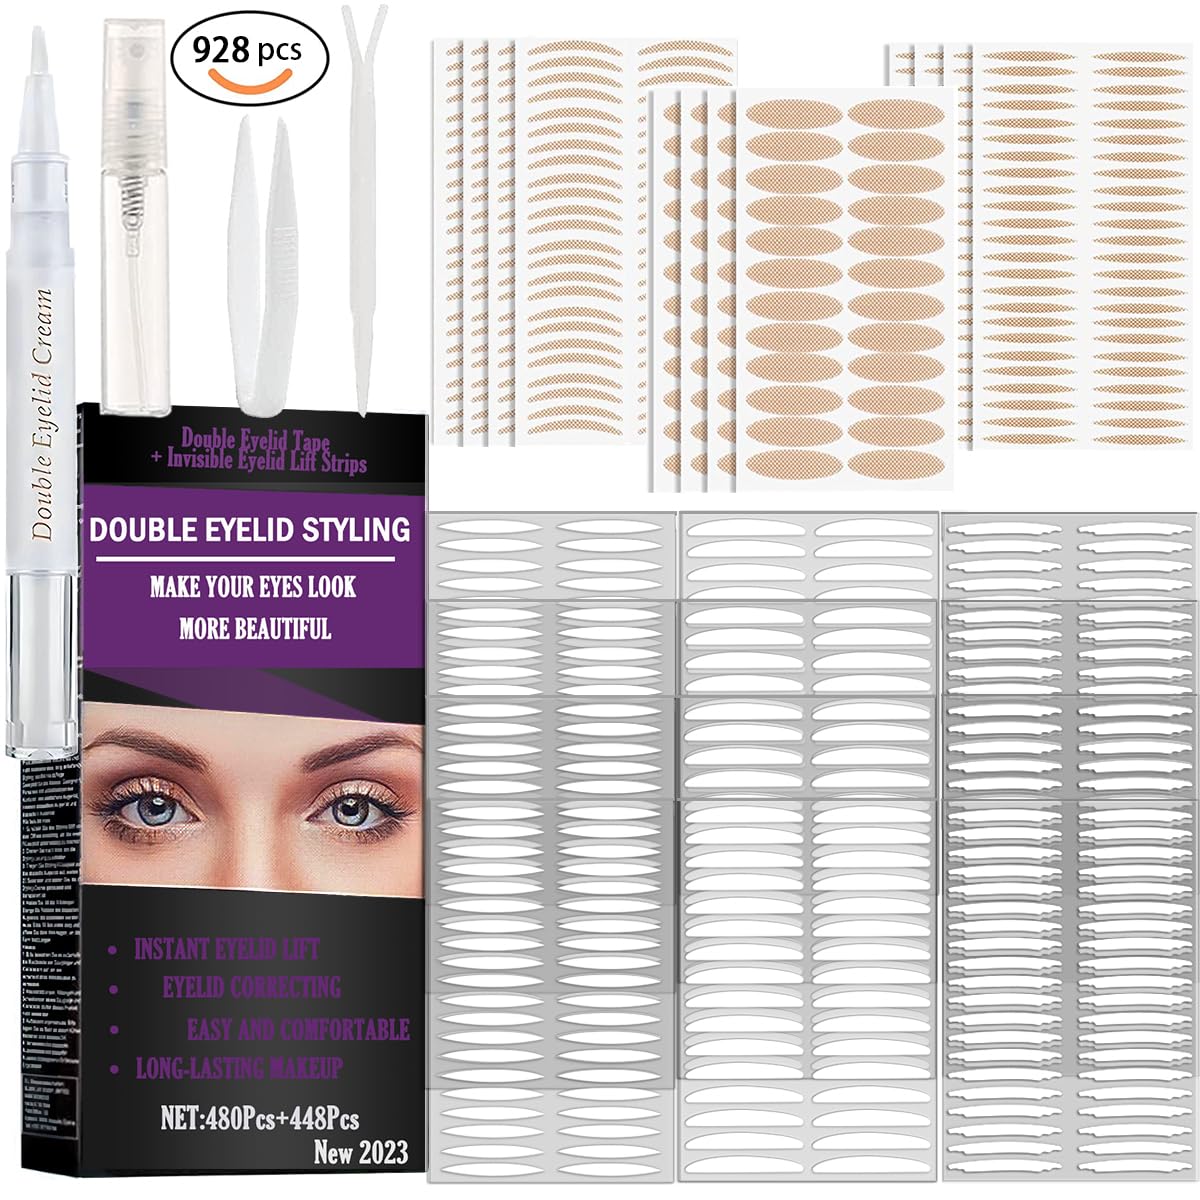 Eyelid Tape - 400 Count of Double Eyelid Lifter Strips for a Dramatic,  Surgery-Free Instant Eye Lift, Suitable for Uneven or Monolids, Say Goodbye  to